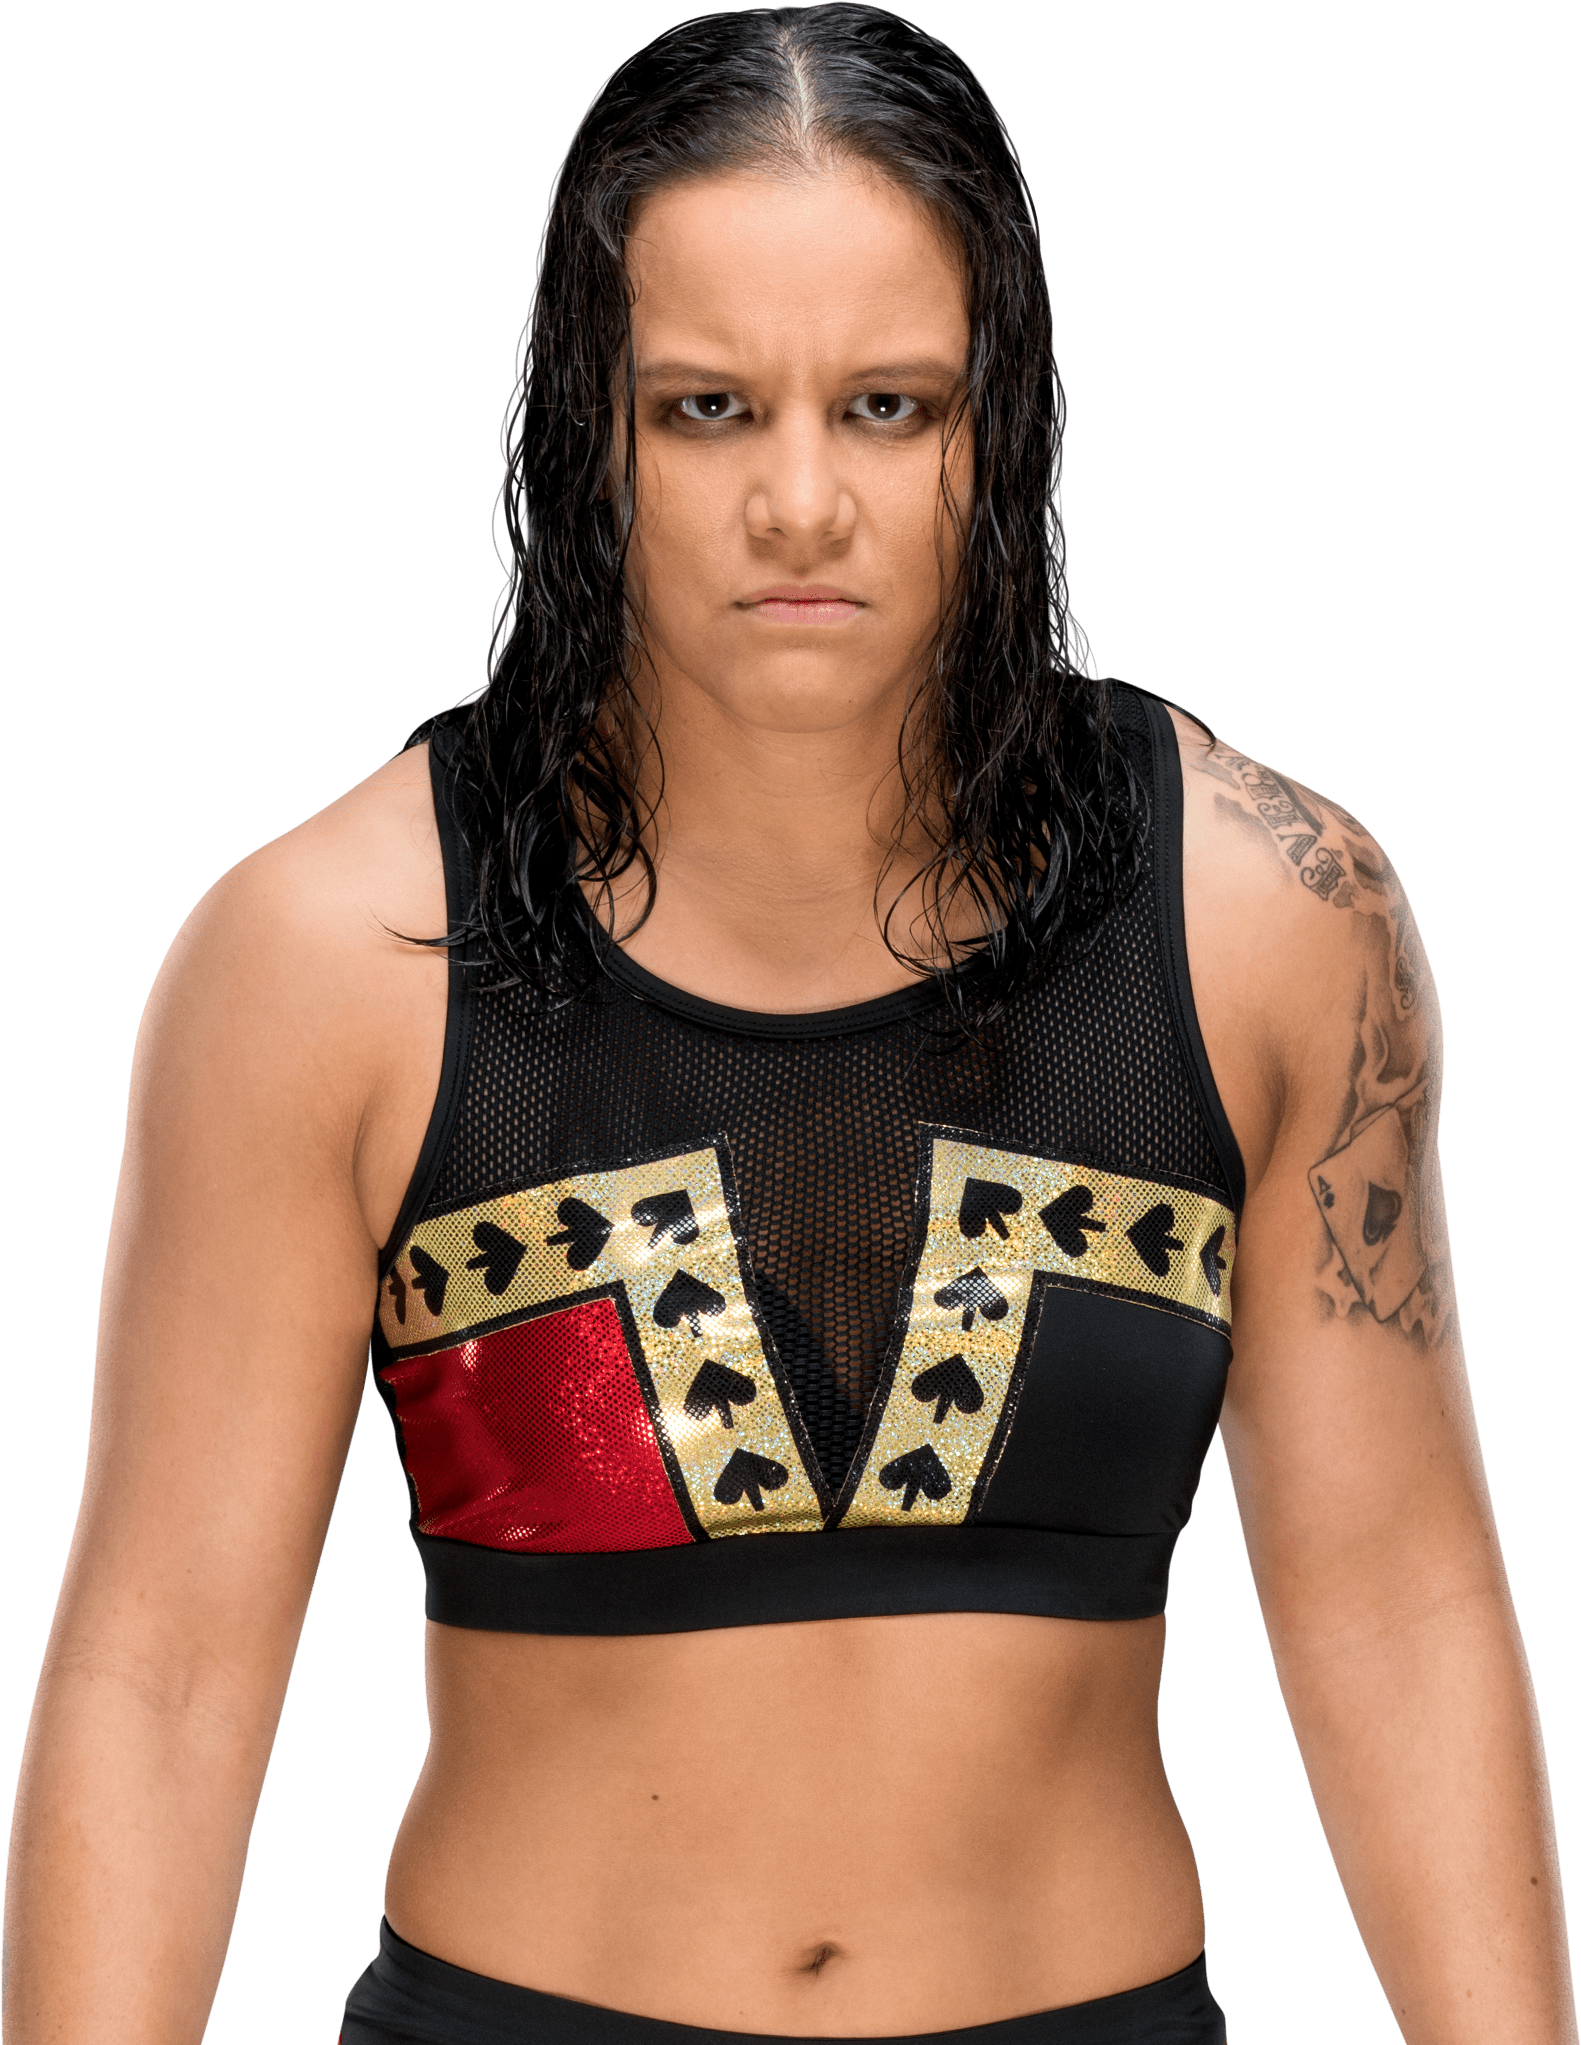 Download Title Matches - - Shayna Baszler Nxt Women's Champi